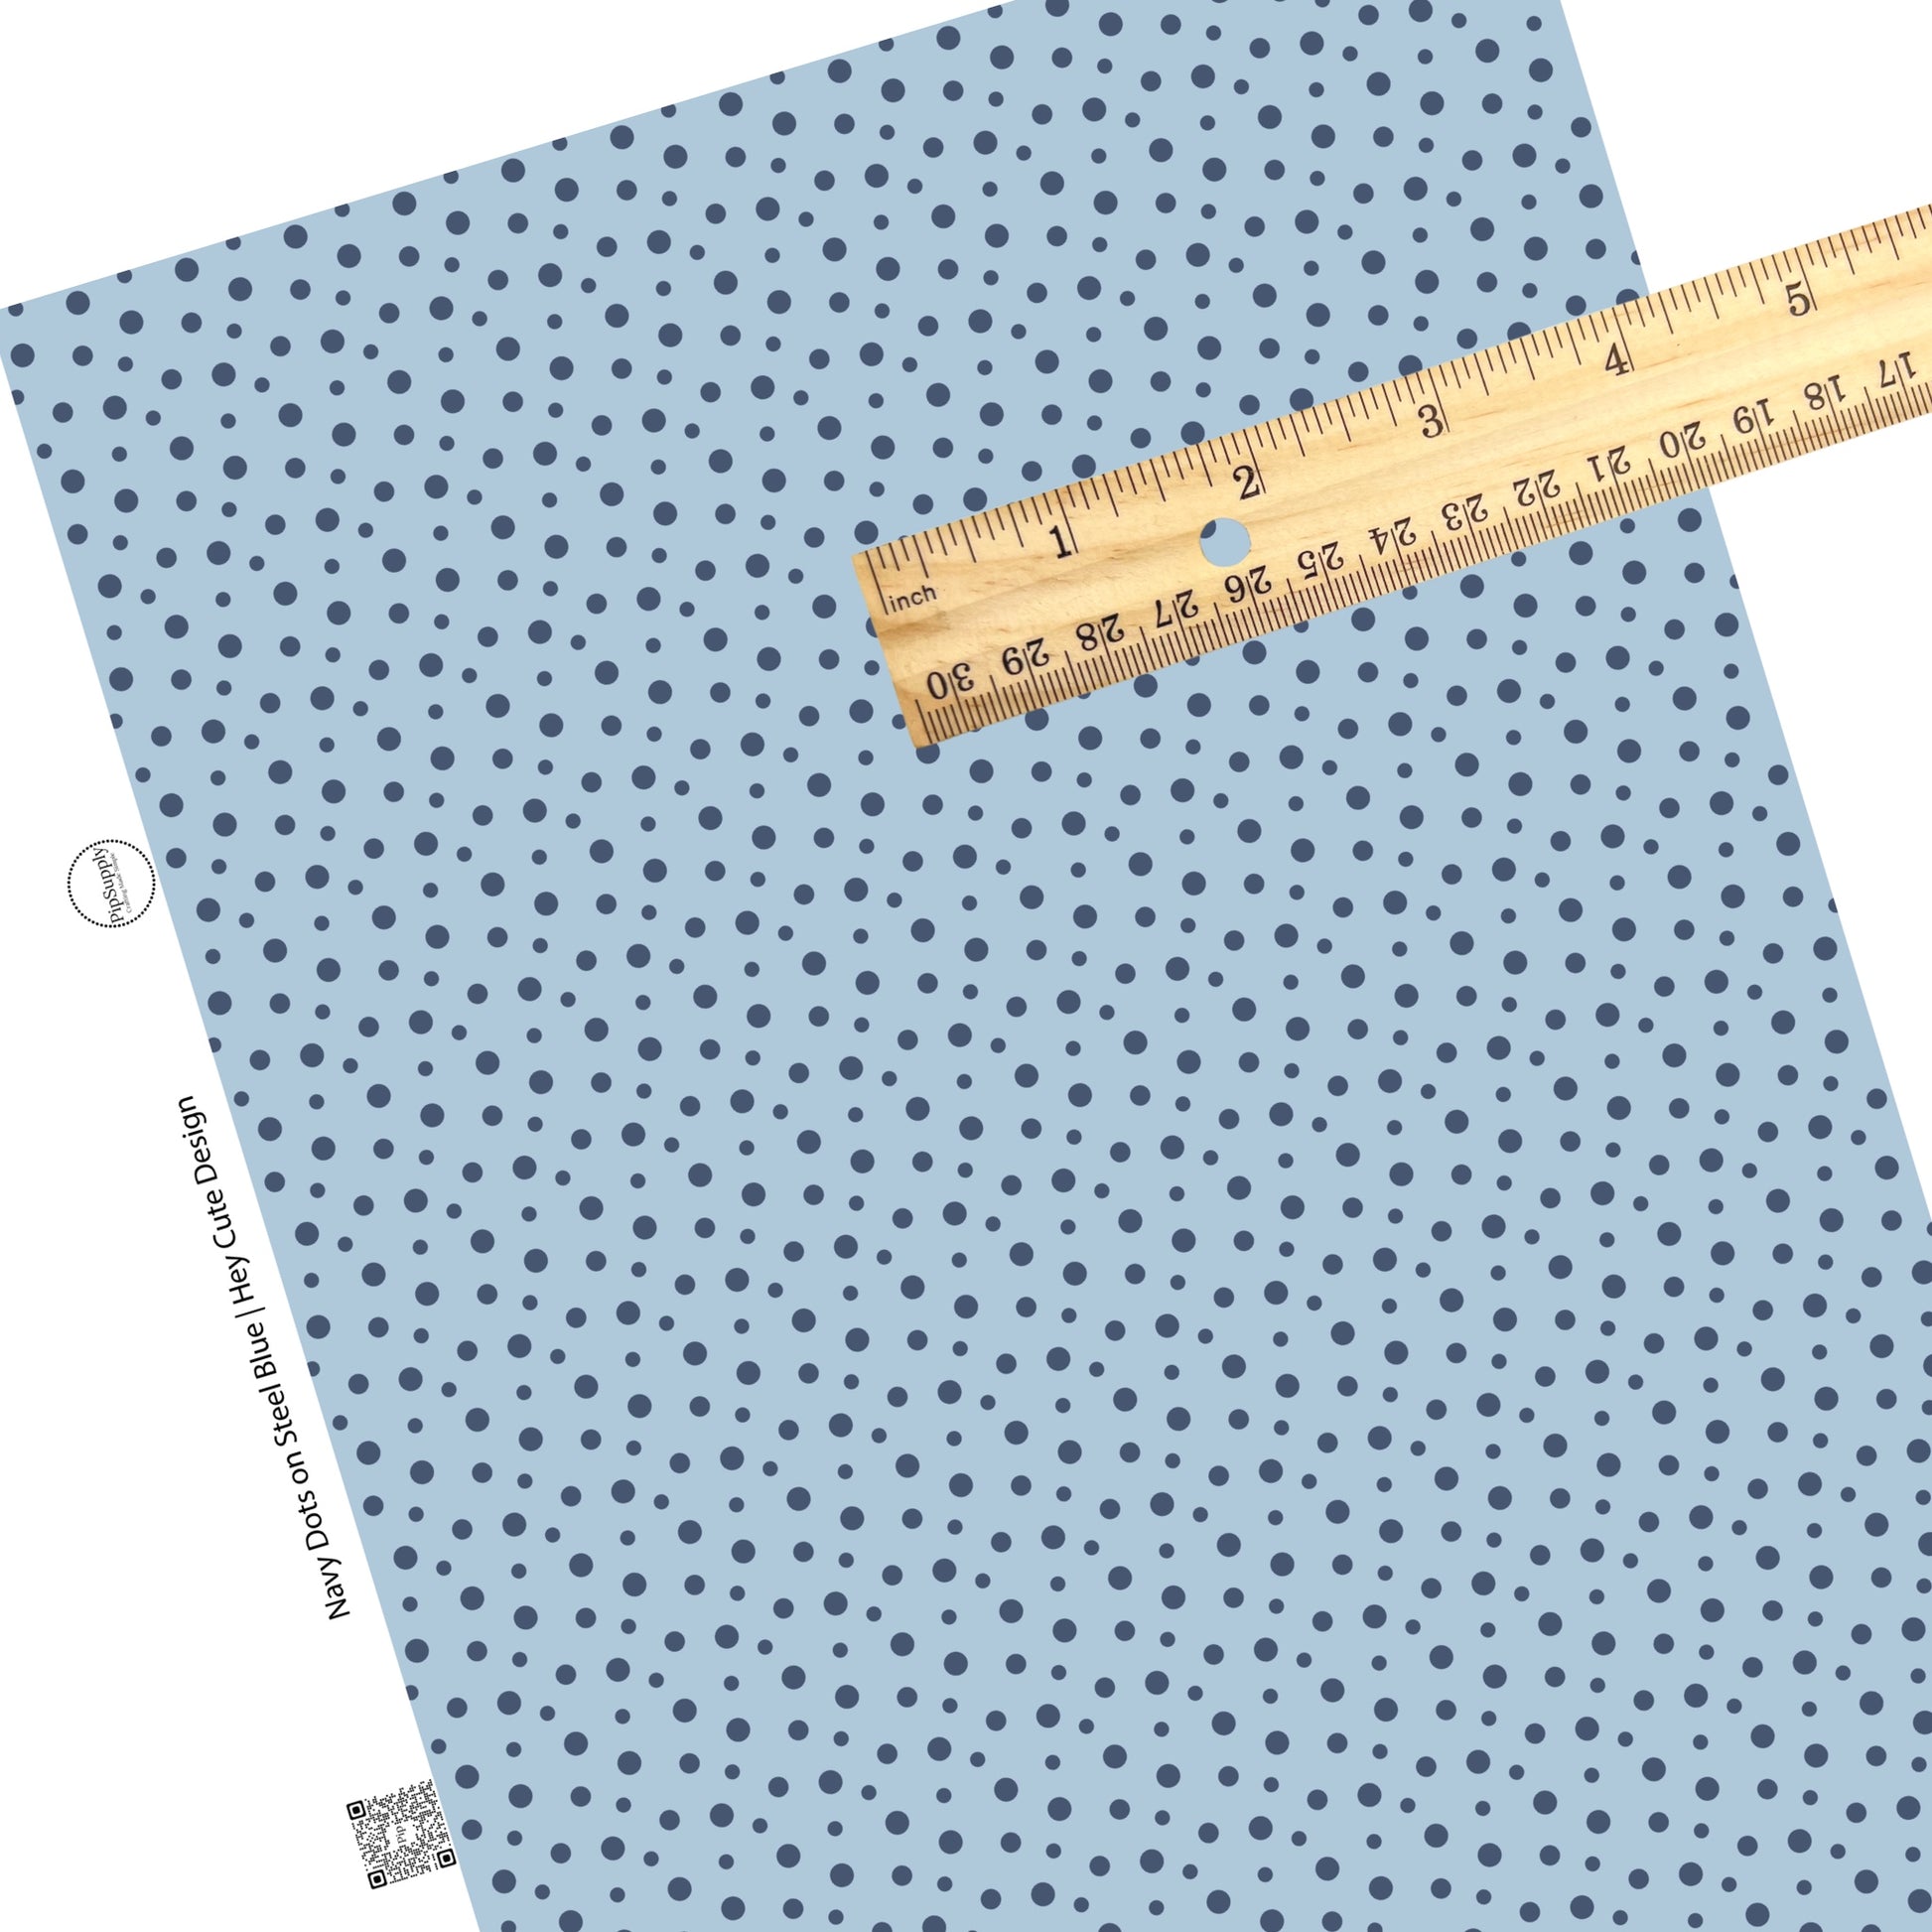 These dot themed light blue faux leather sheets contain the following design elements: small dark blue dots on light blue.